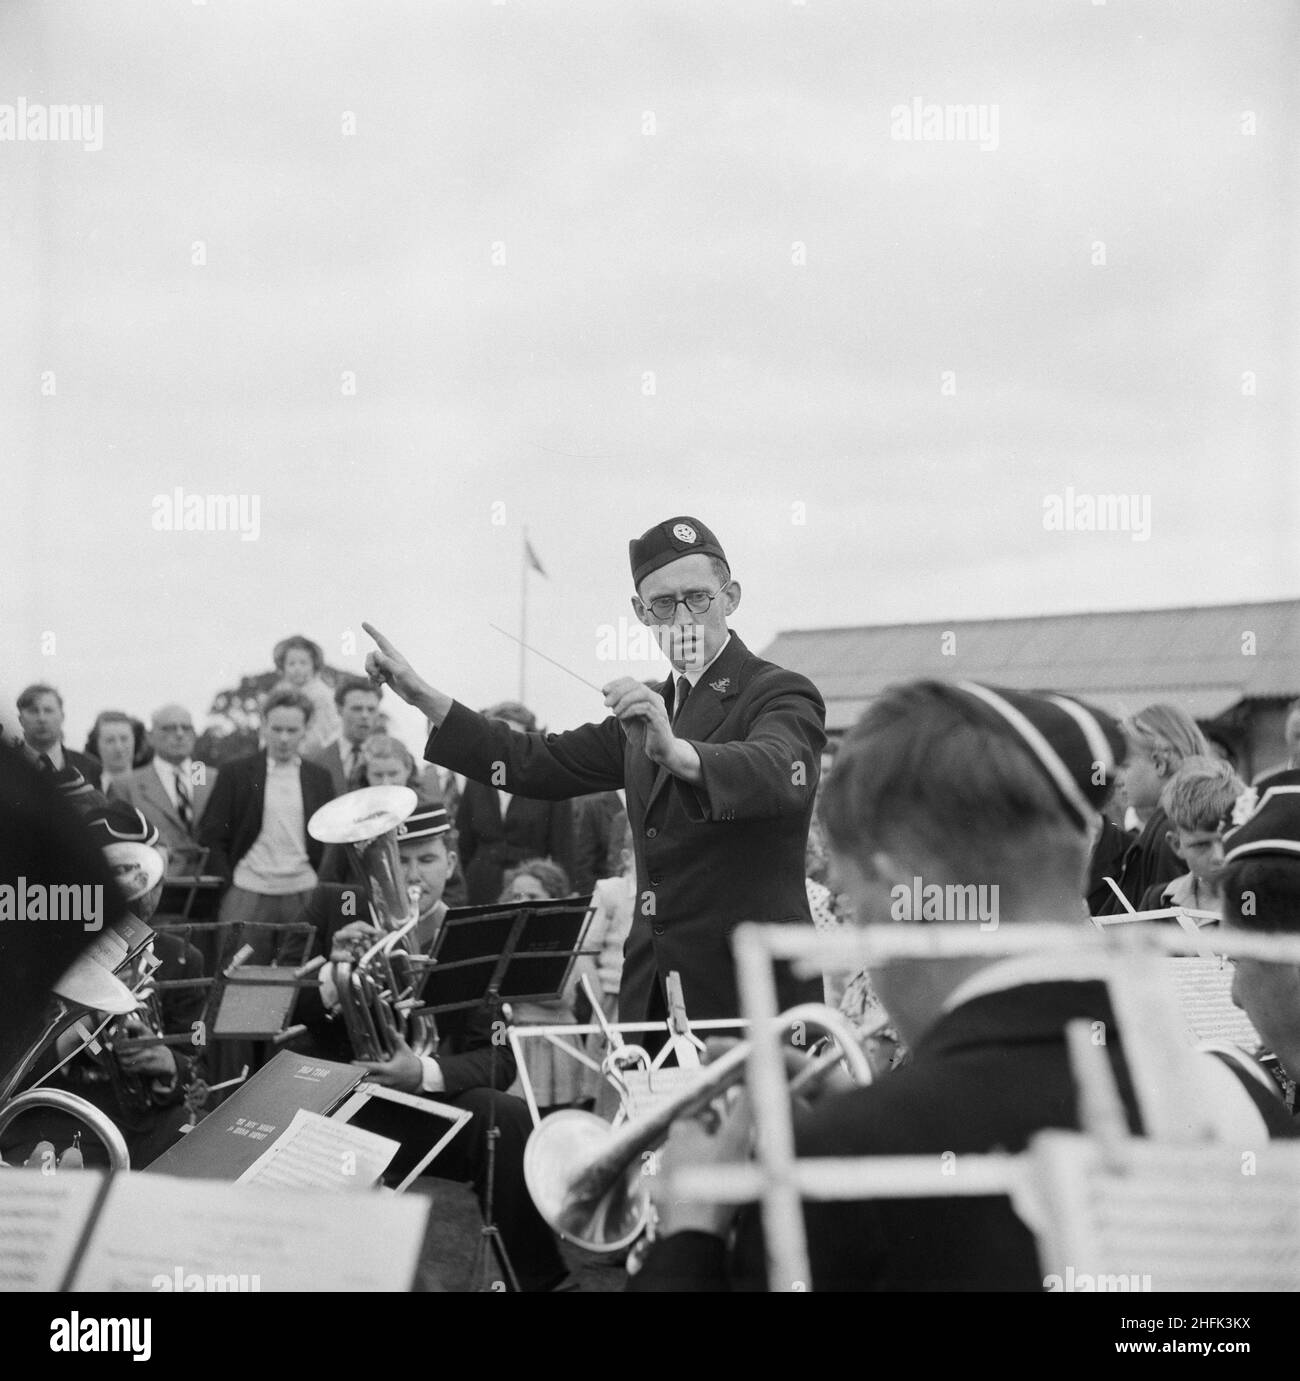 Laing Sports Ground, Rowley Lane, Elstree, Barnet, London, 27/06/1953. A man conducting a brass band during a sports meeting held at Laing's Sports Club in Elstree. Stock Photo